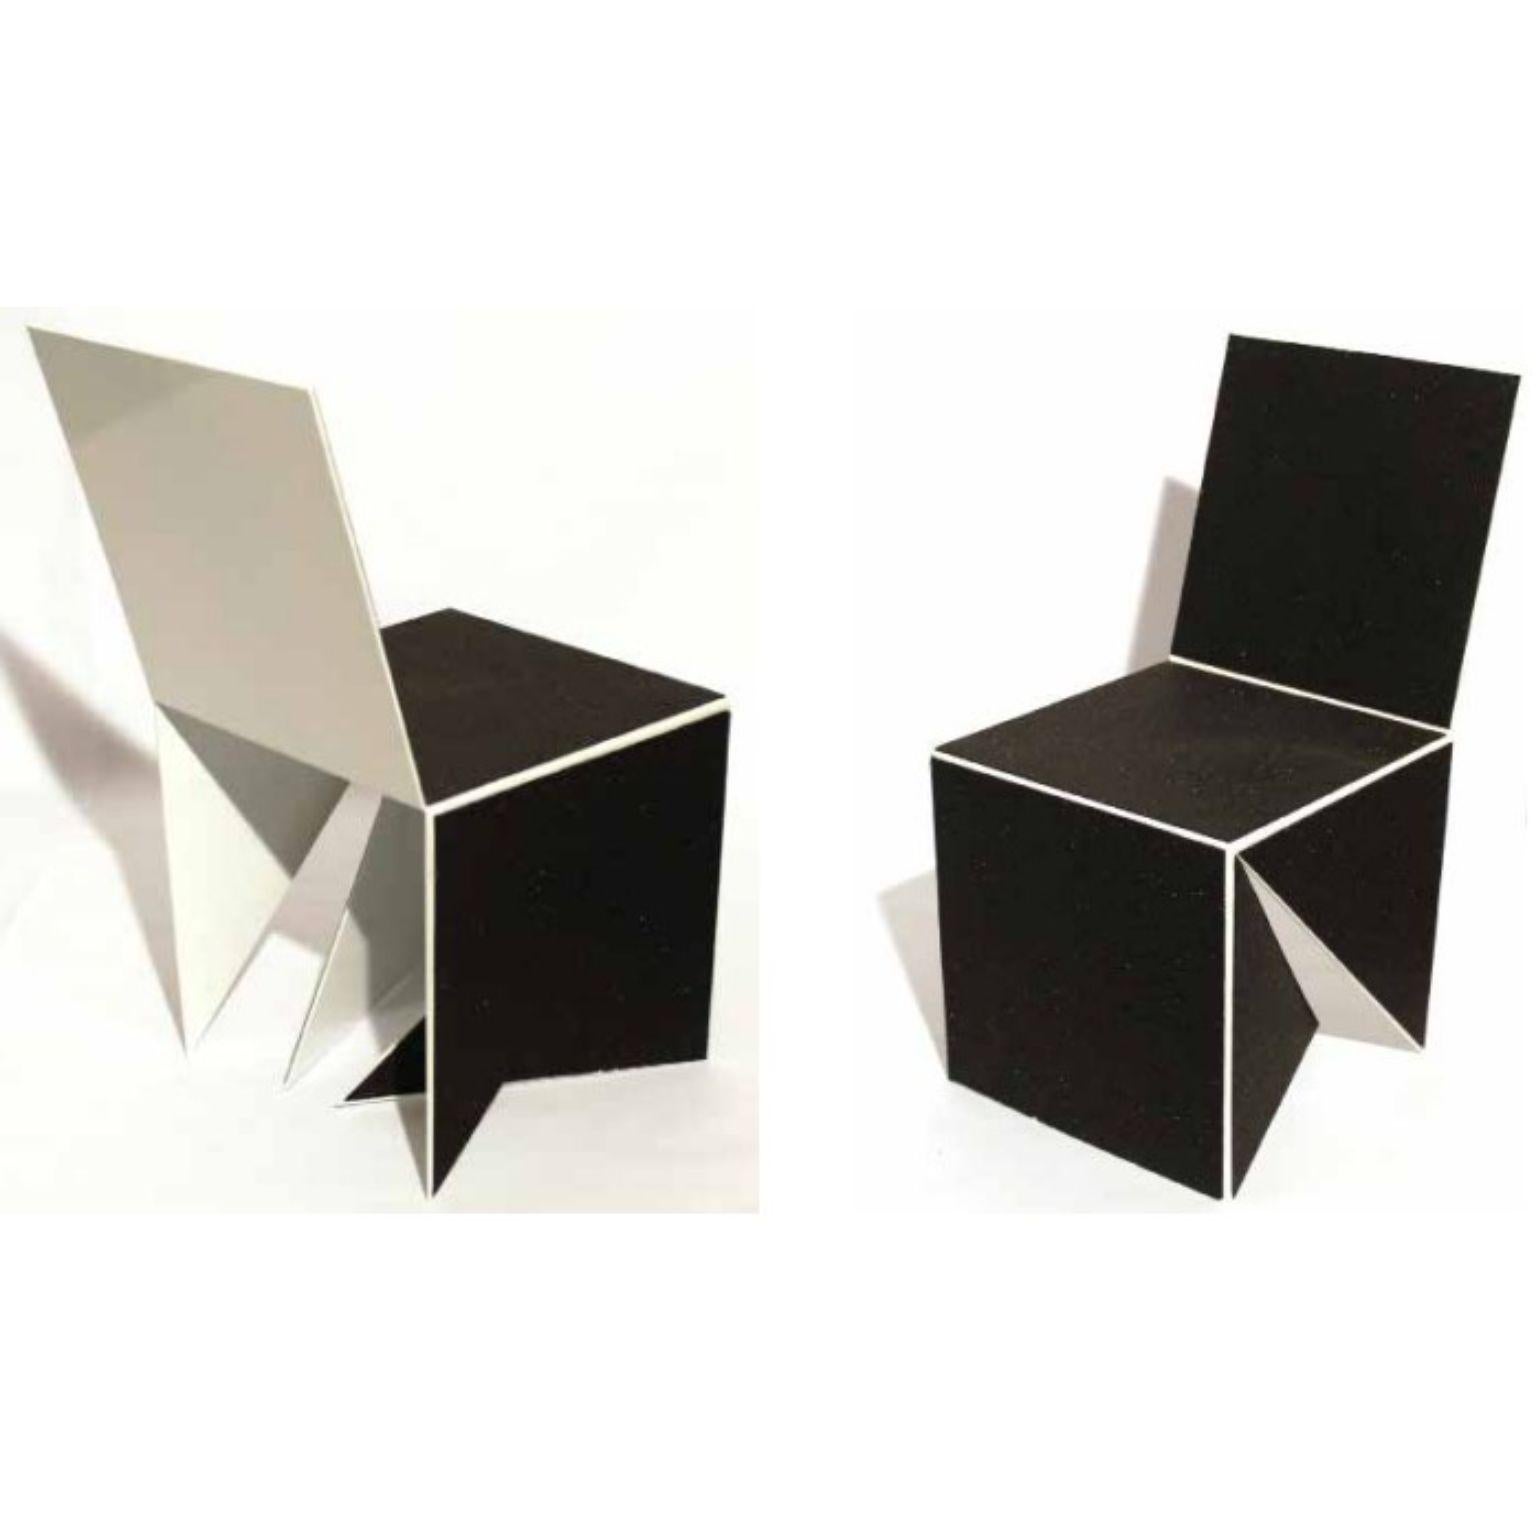 Set of 2 Casulo cubes #2 by Mameluca
Material: electrostatic sluminum paint, recycled rubber blanket.
Dimensions: D 45 x W 45 x H 90 cm

Opening a cube and transforming it into a plan was the starting point for the creation of this trio of